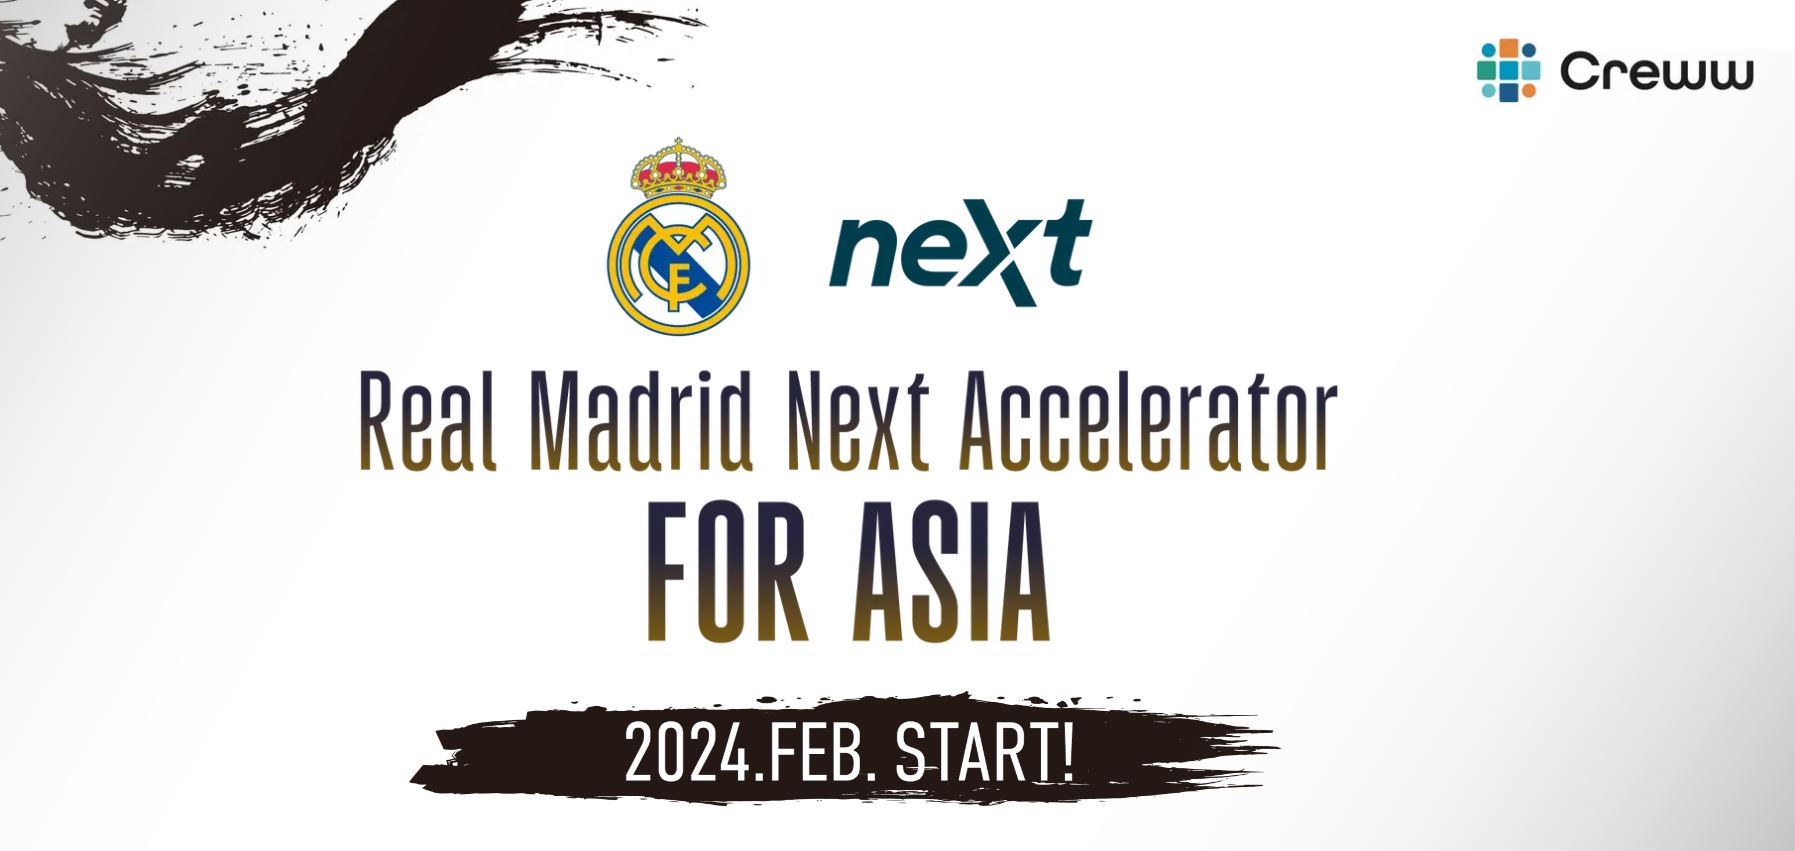 Real Madrid Next Accelerator For Asia